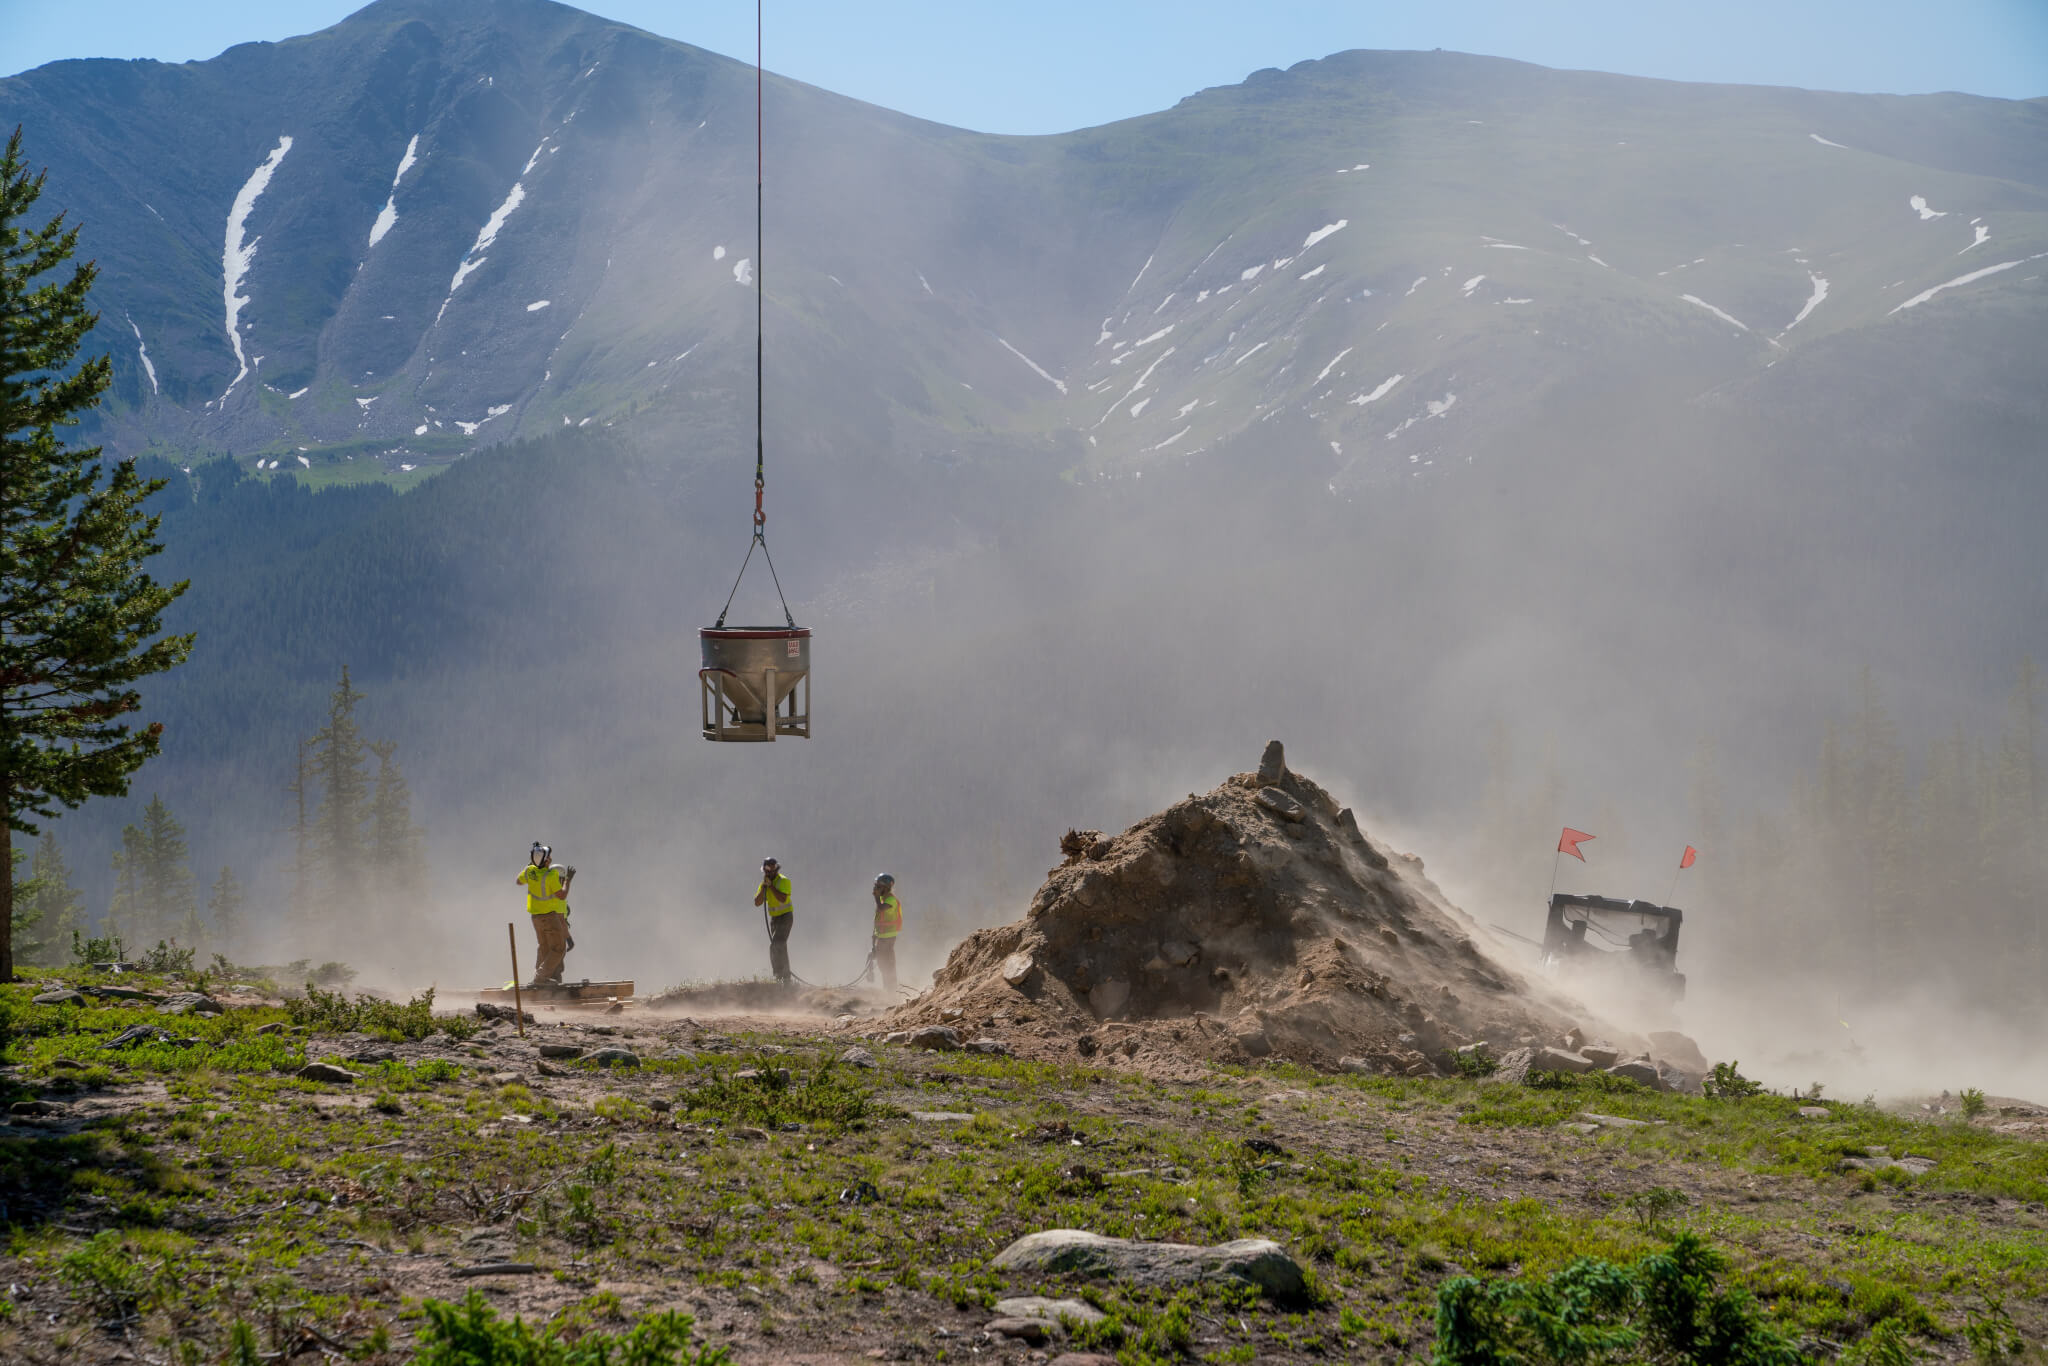 Cement pour for new high speed chairlift at Winter Park Resort